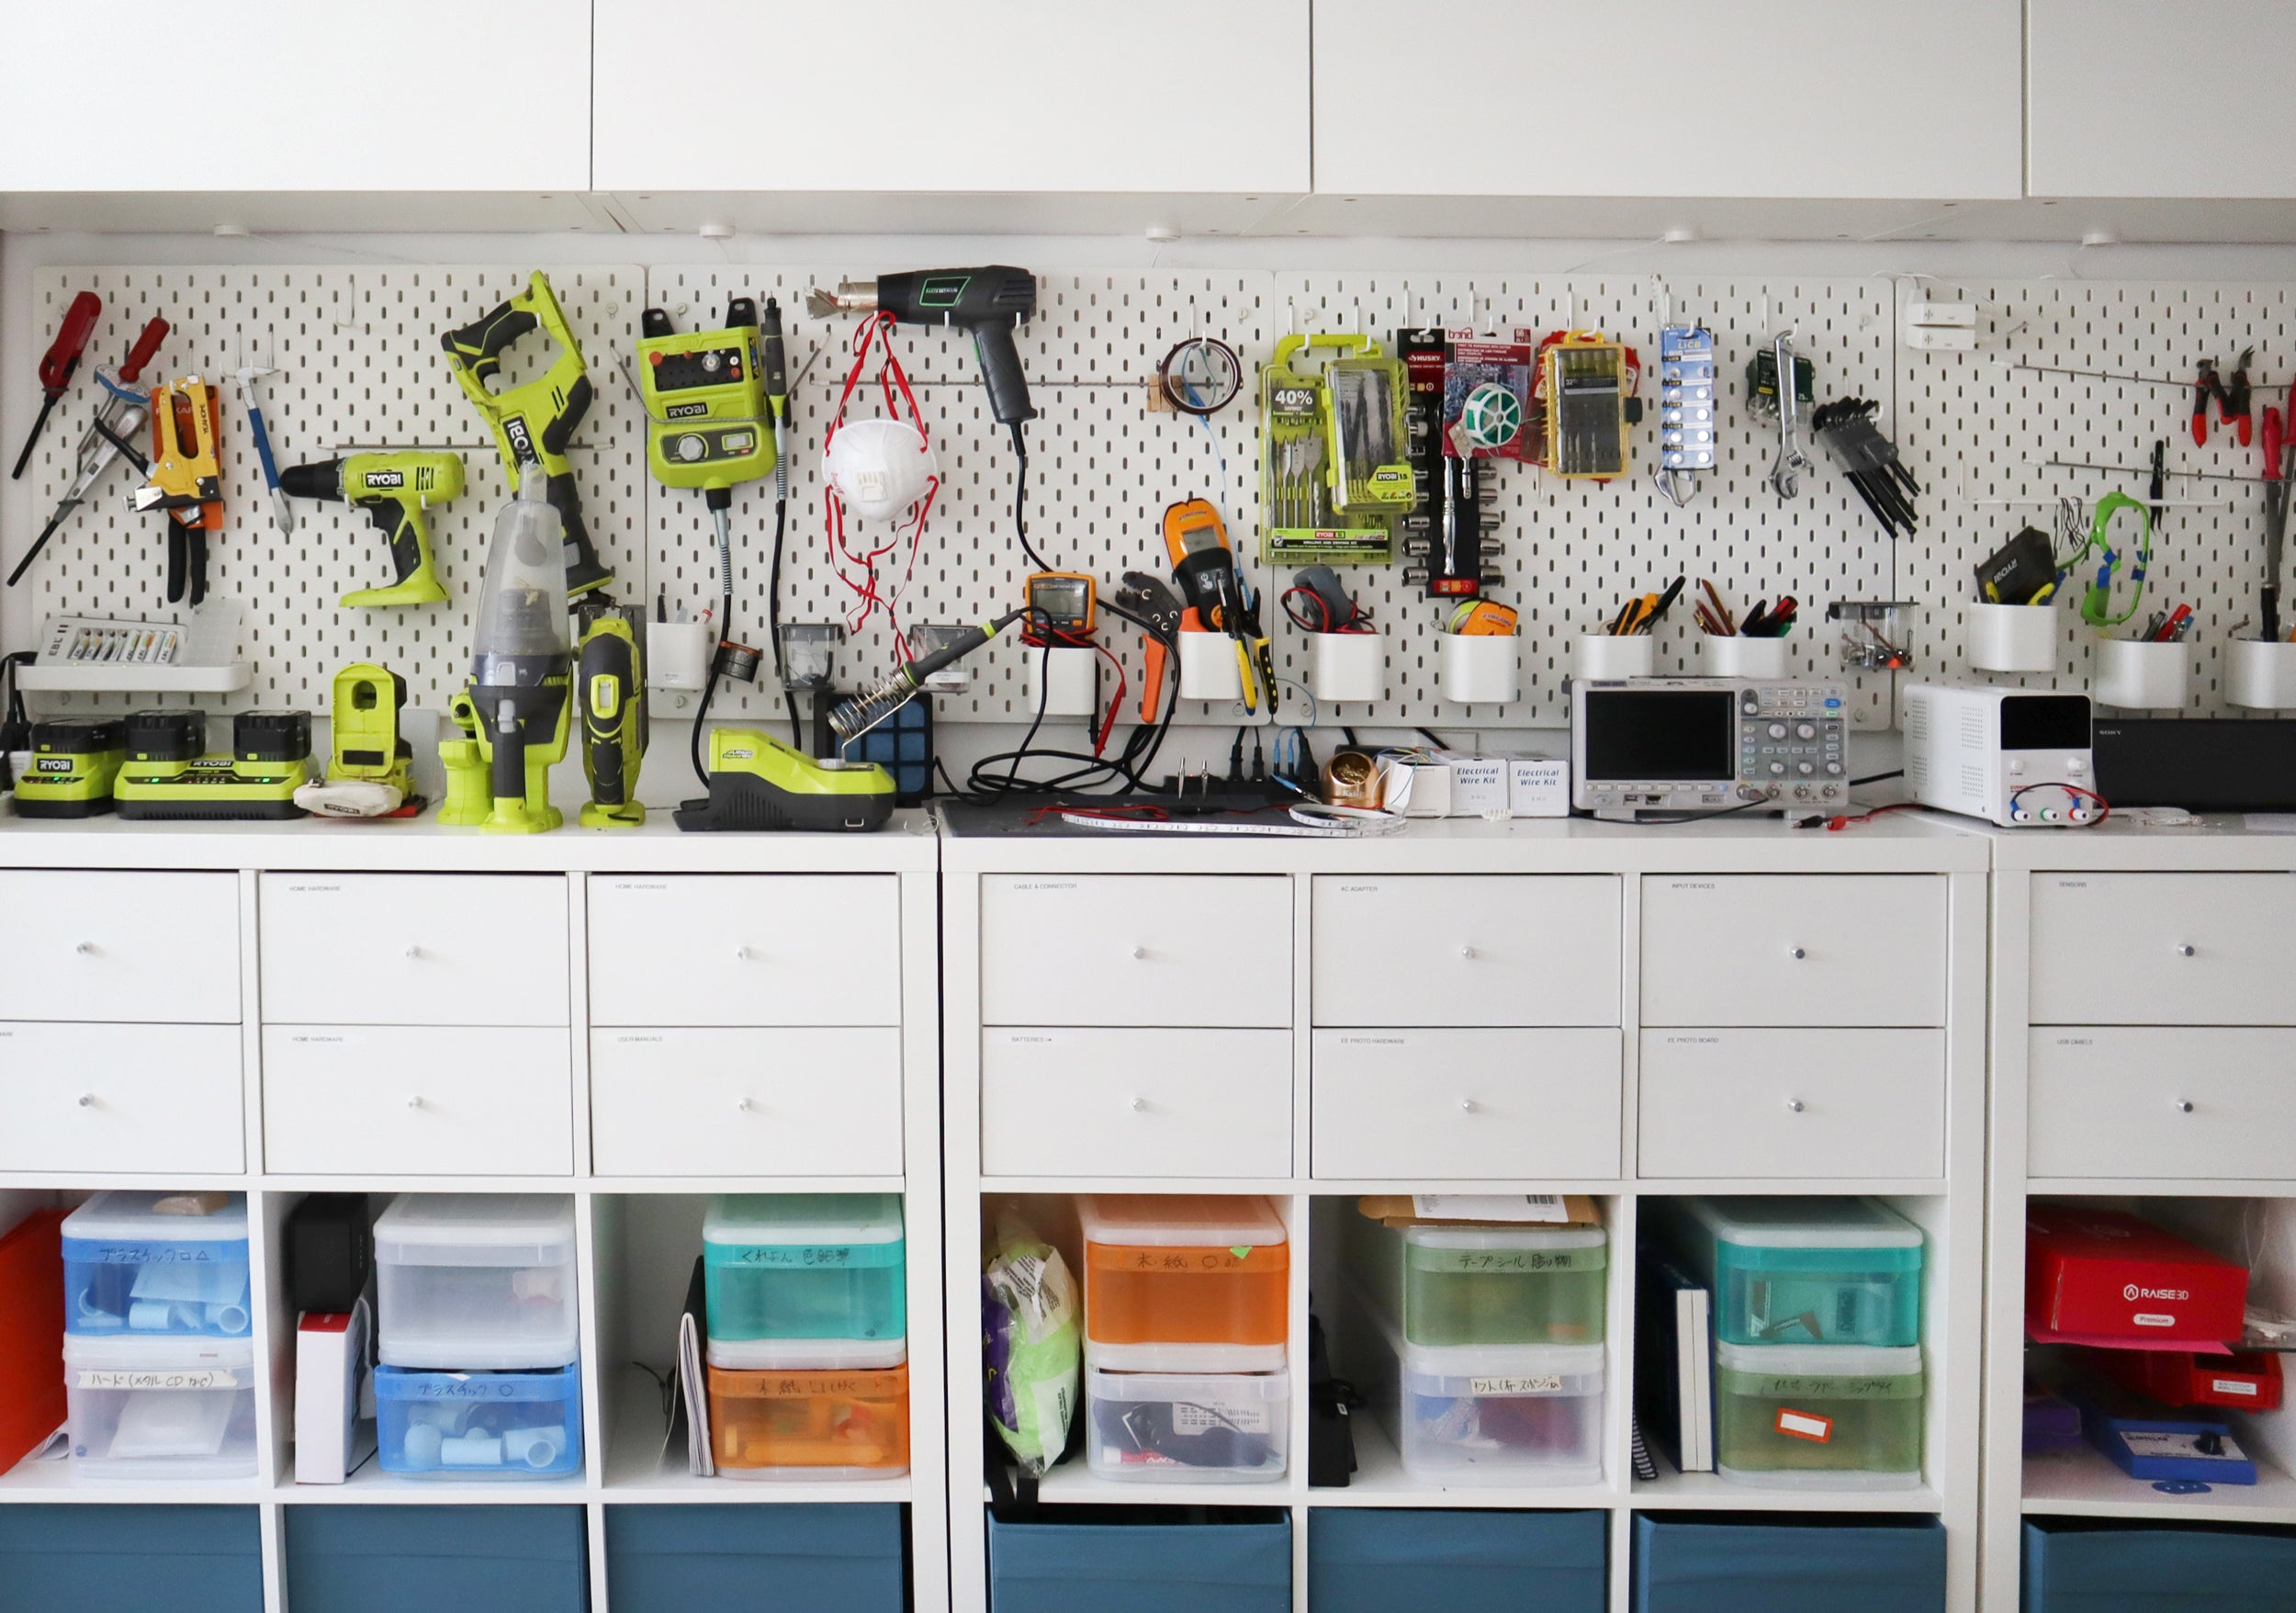  Naoto’s work space features a long white pegboard with brightly-colored tools and gadgets, hanging above rows of drawers and colorful organizing bins. 